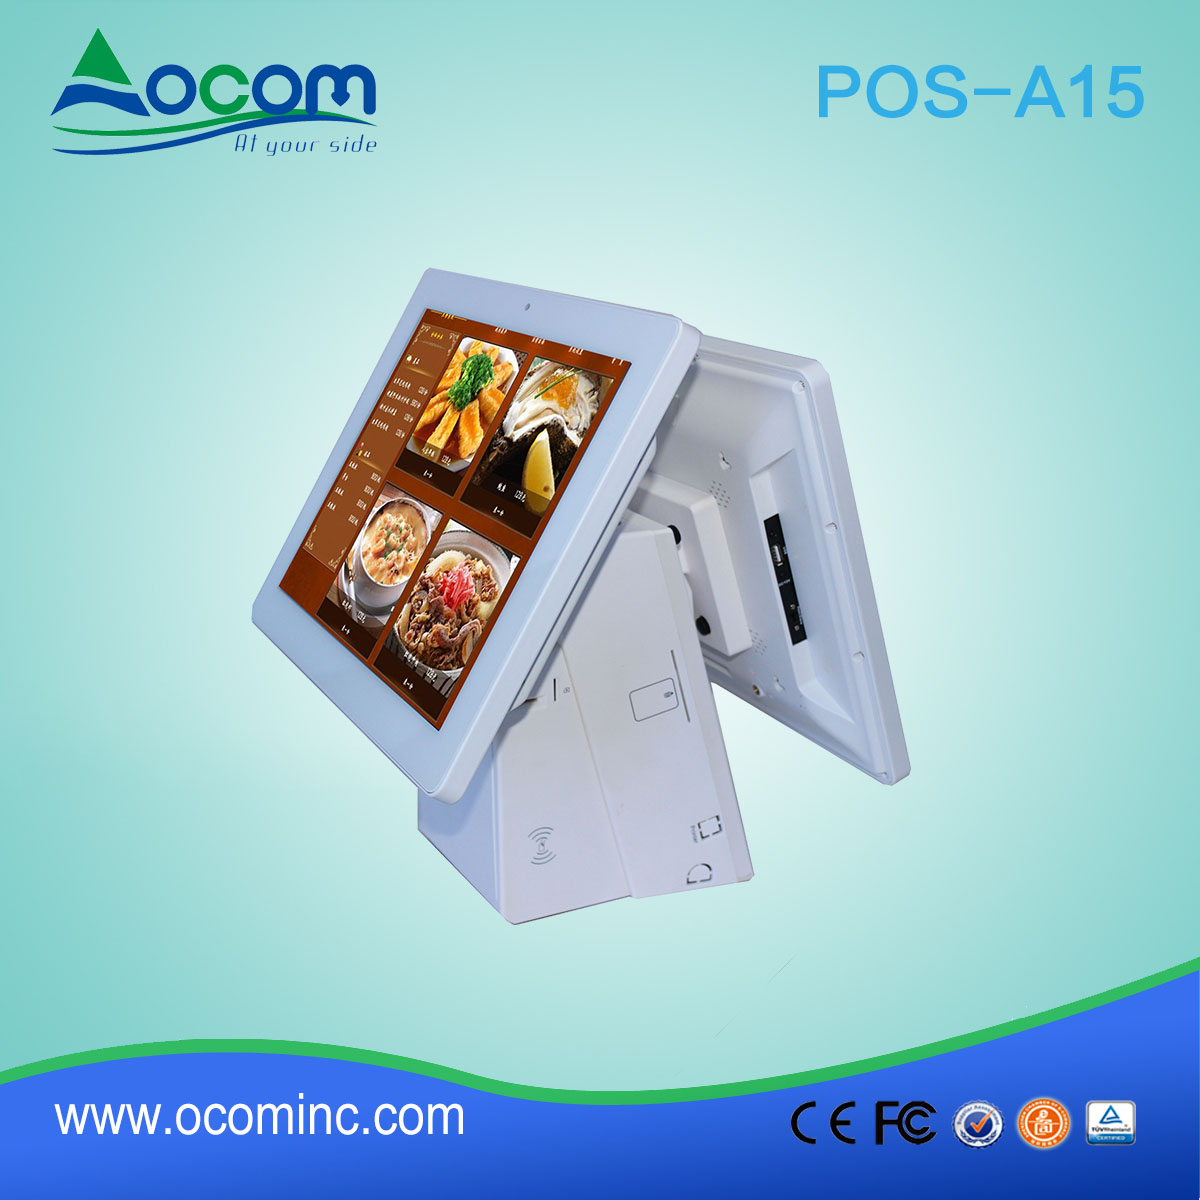 (POS-A15) Windows \/ Android Touch screen POS Terminal met 58mm \/ 80mm thermische Printer